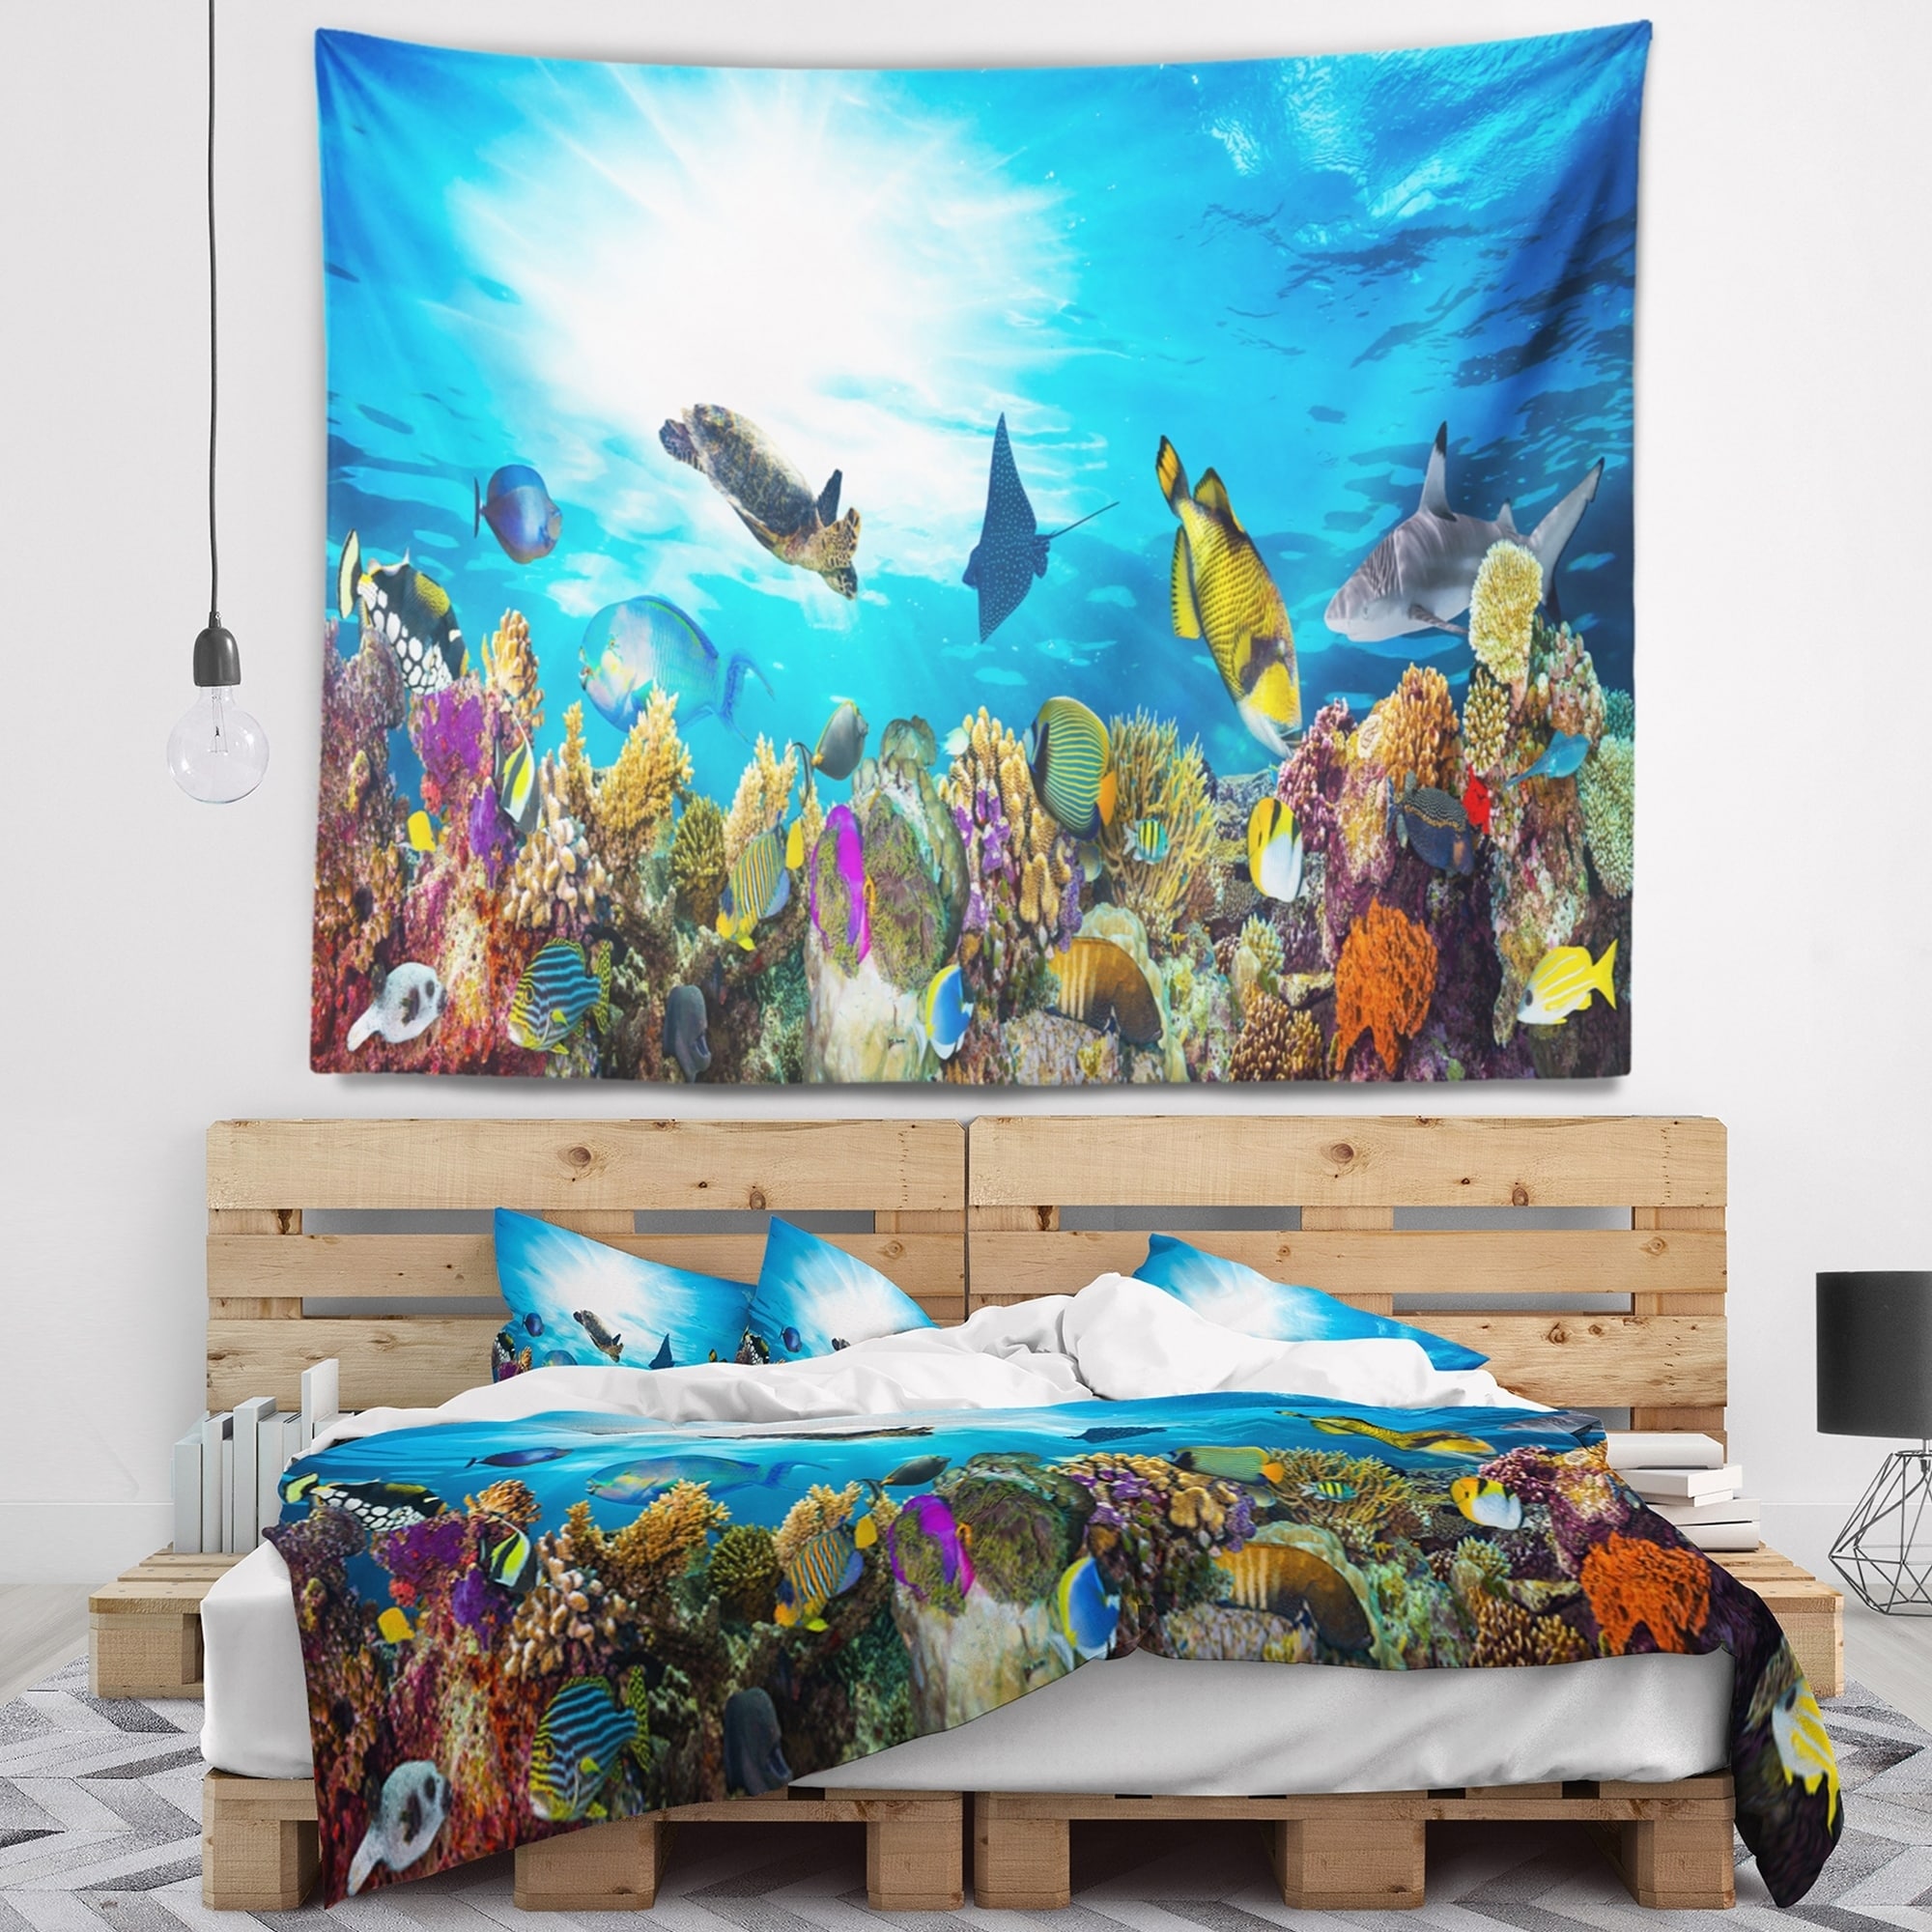 Designart 'Colorful Coral Reef with Fishes' Seascape Wall Small | eBay